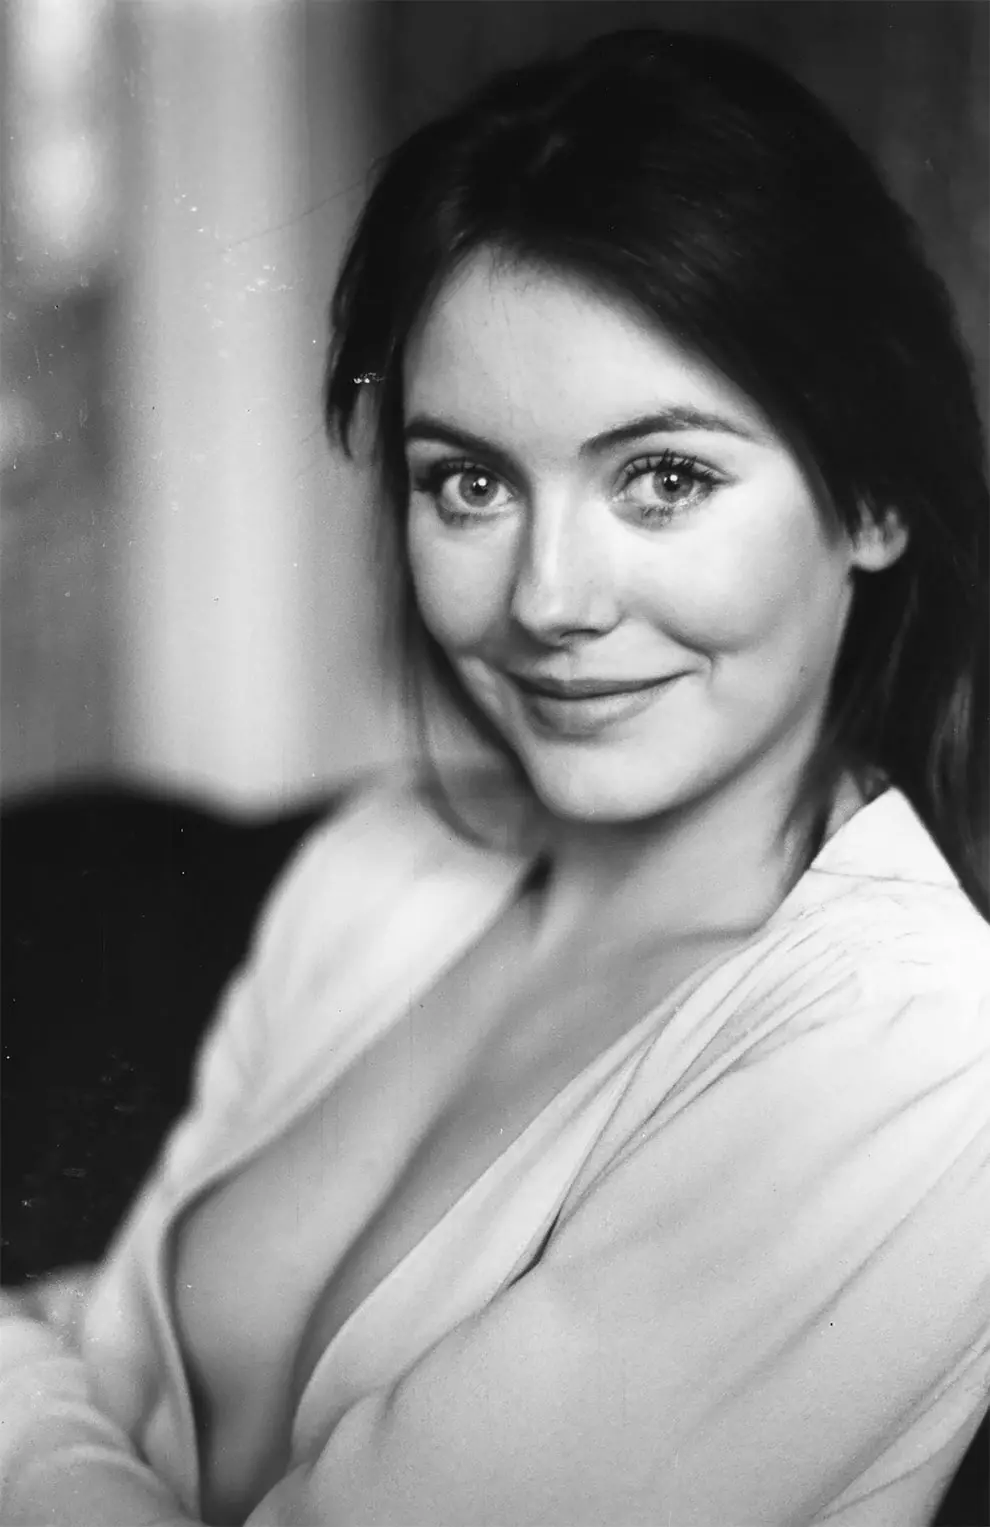 British actress Lesley-Anne Down. (Photo by Express Newspapers/Getty Images). 1971